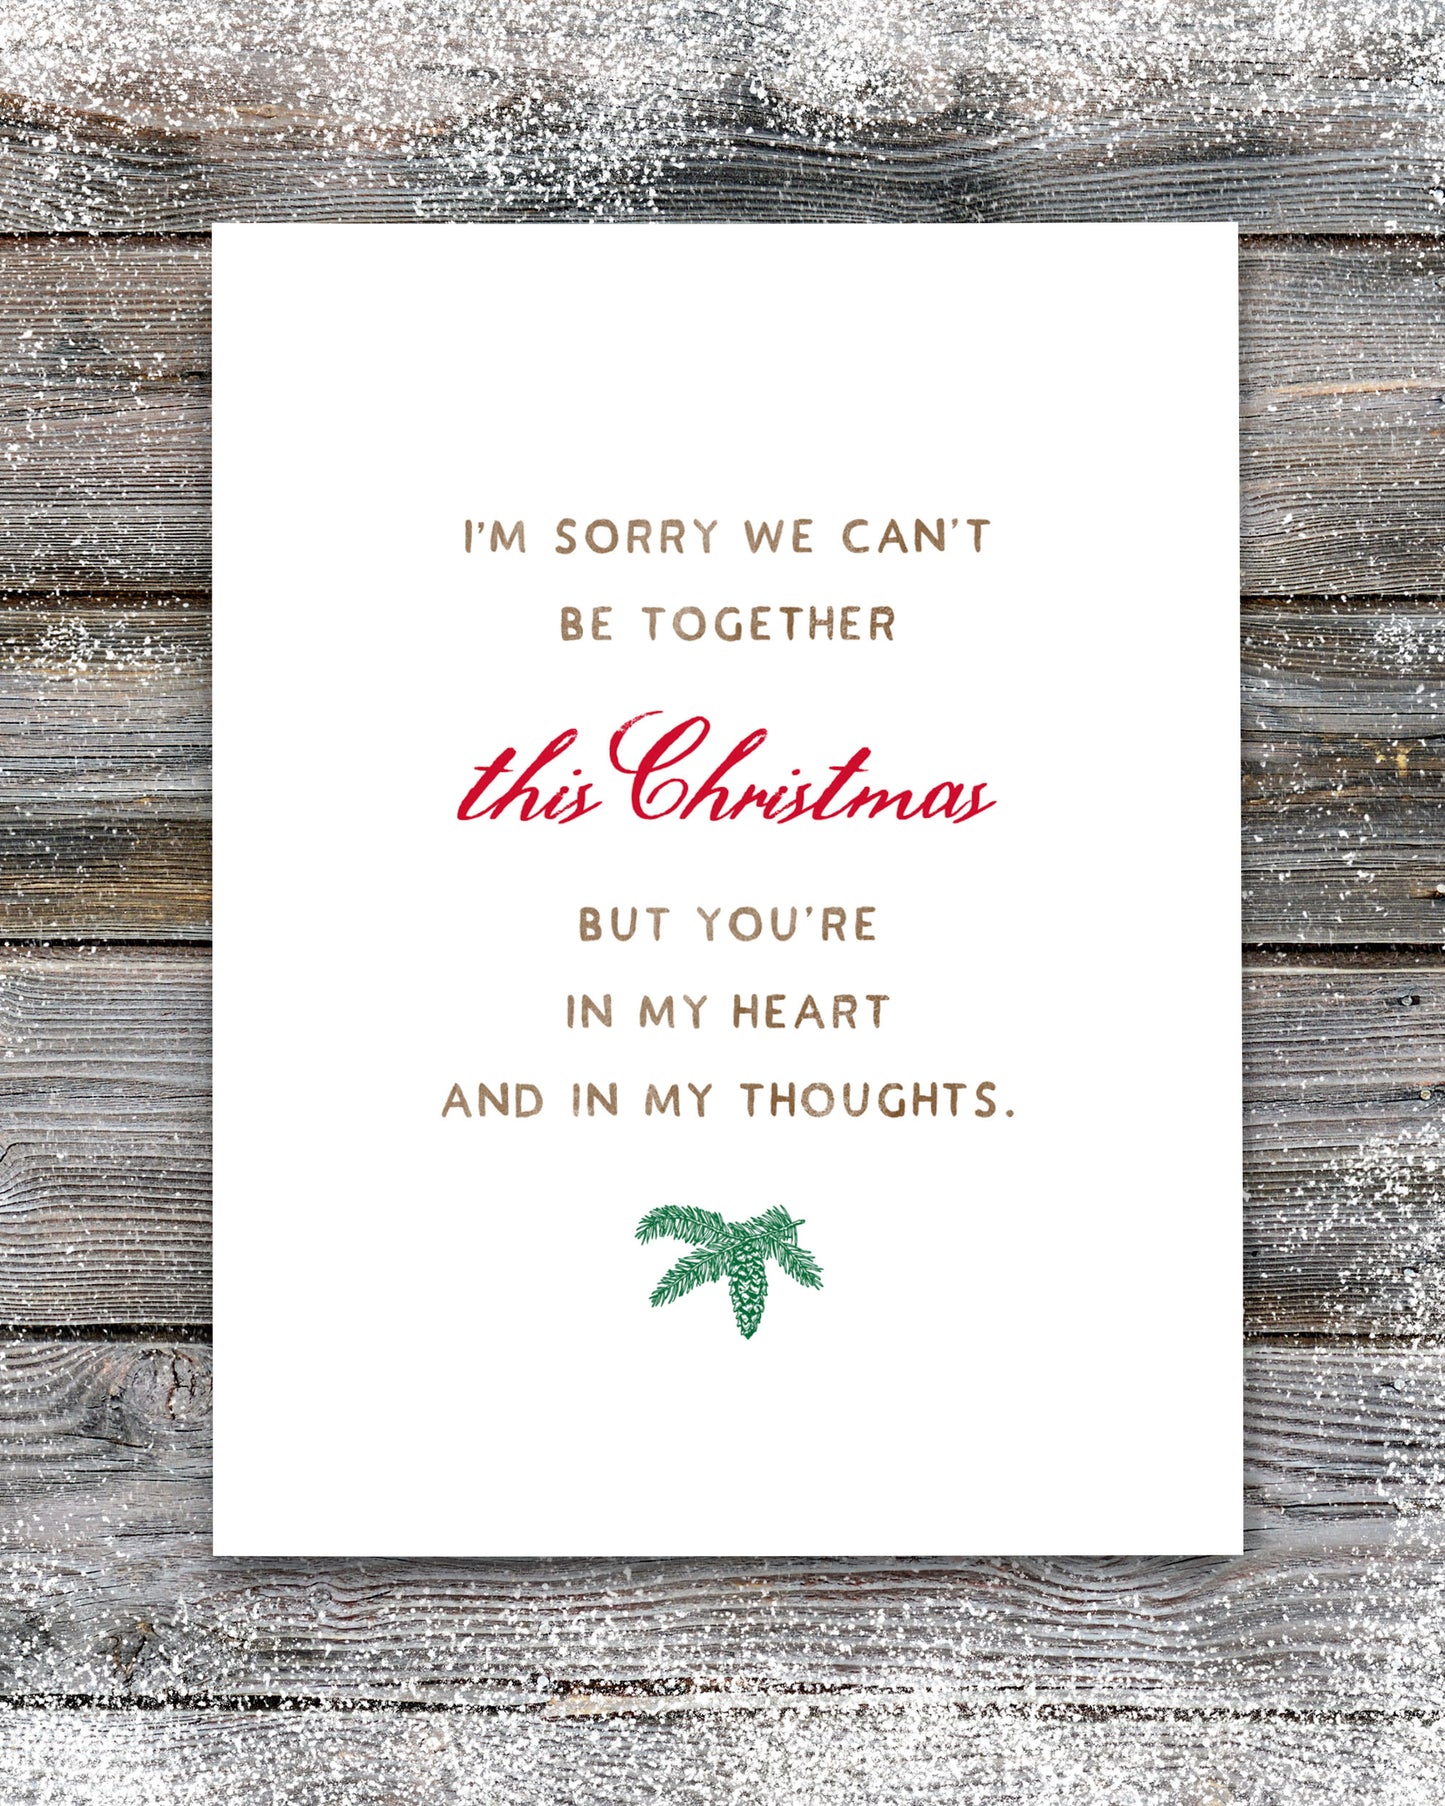 Lonely Covid Christmas Cards by Smirkantile